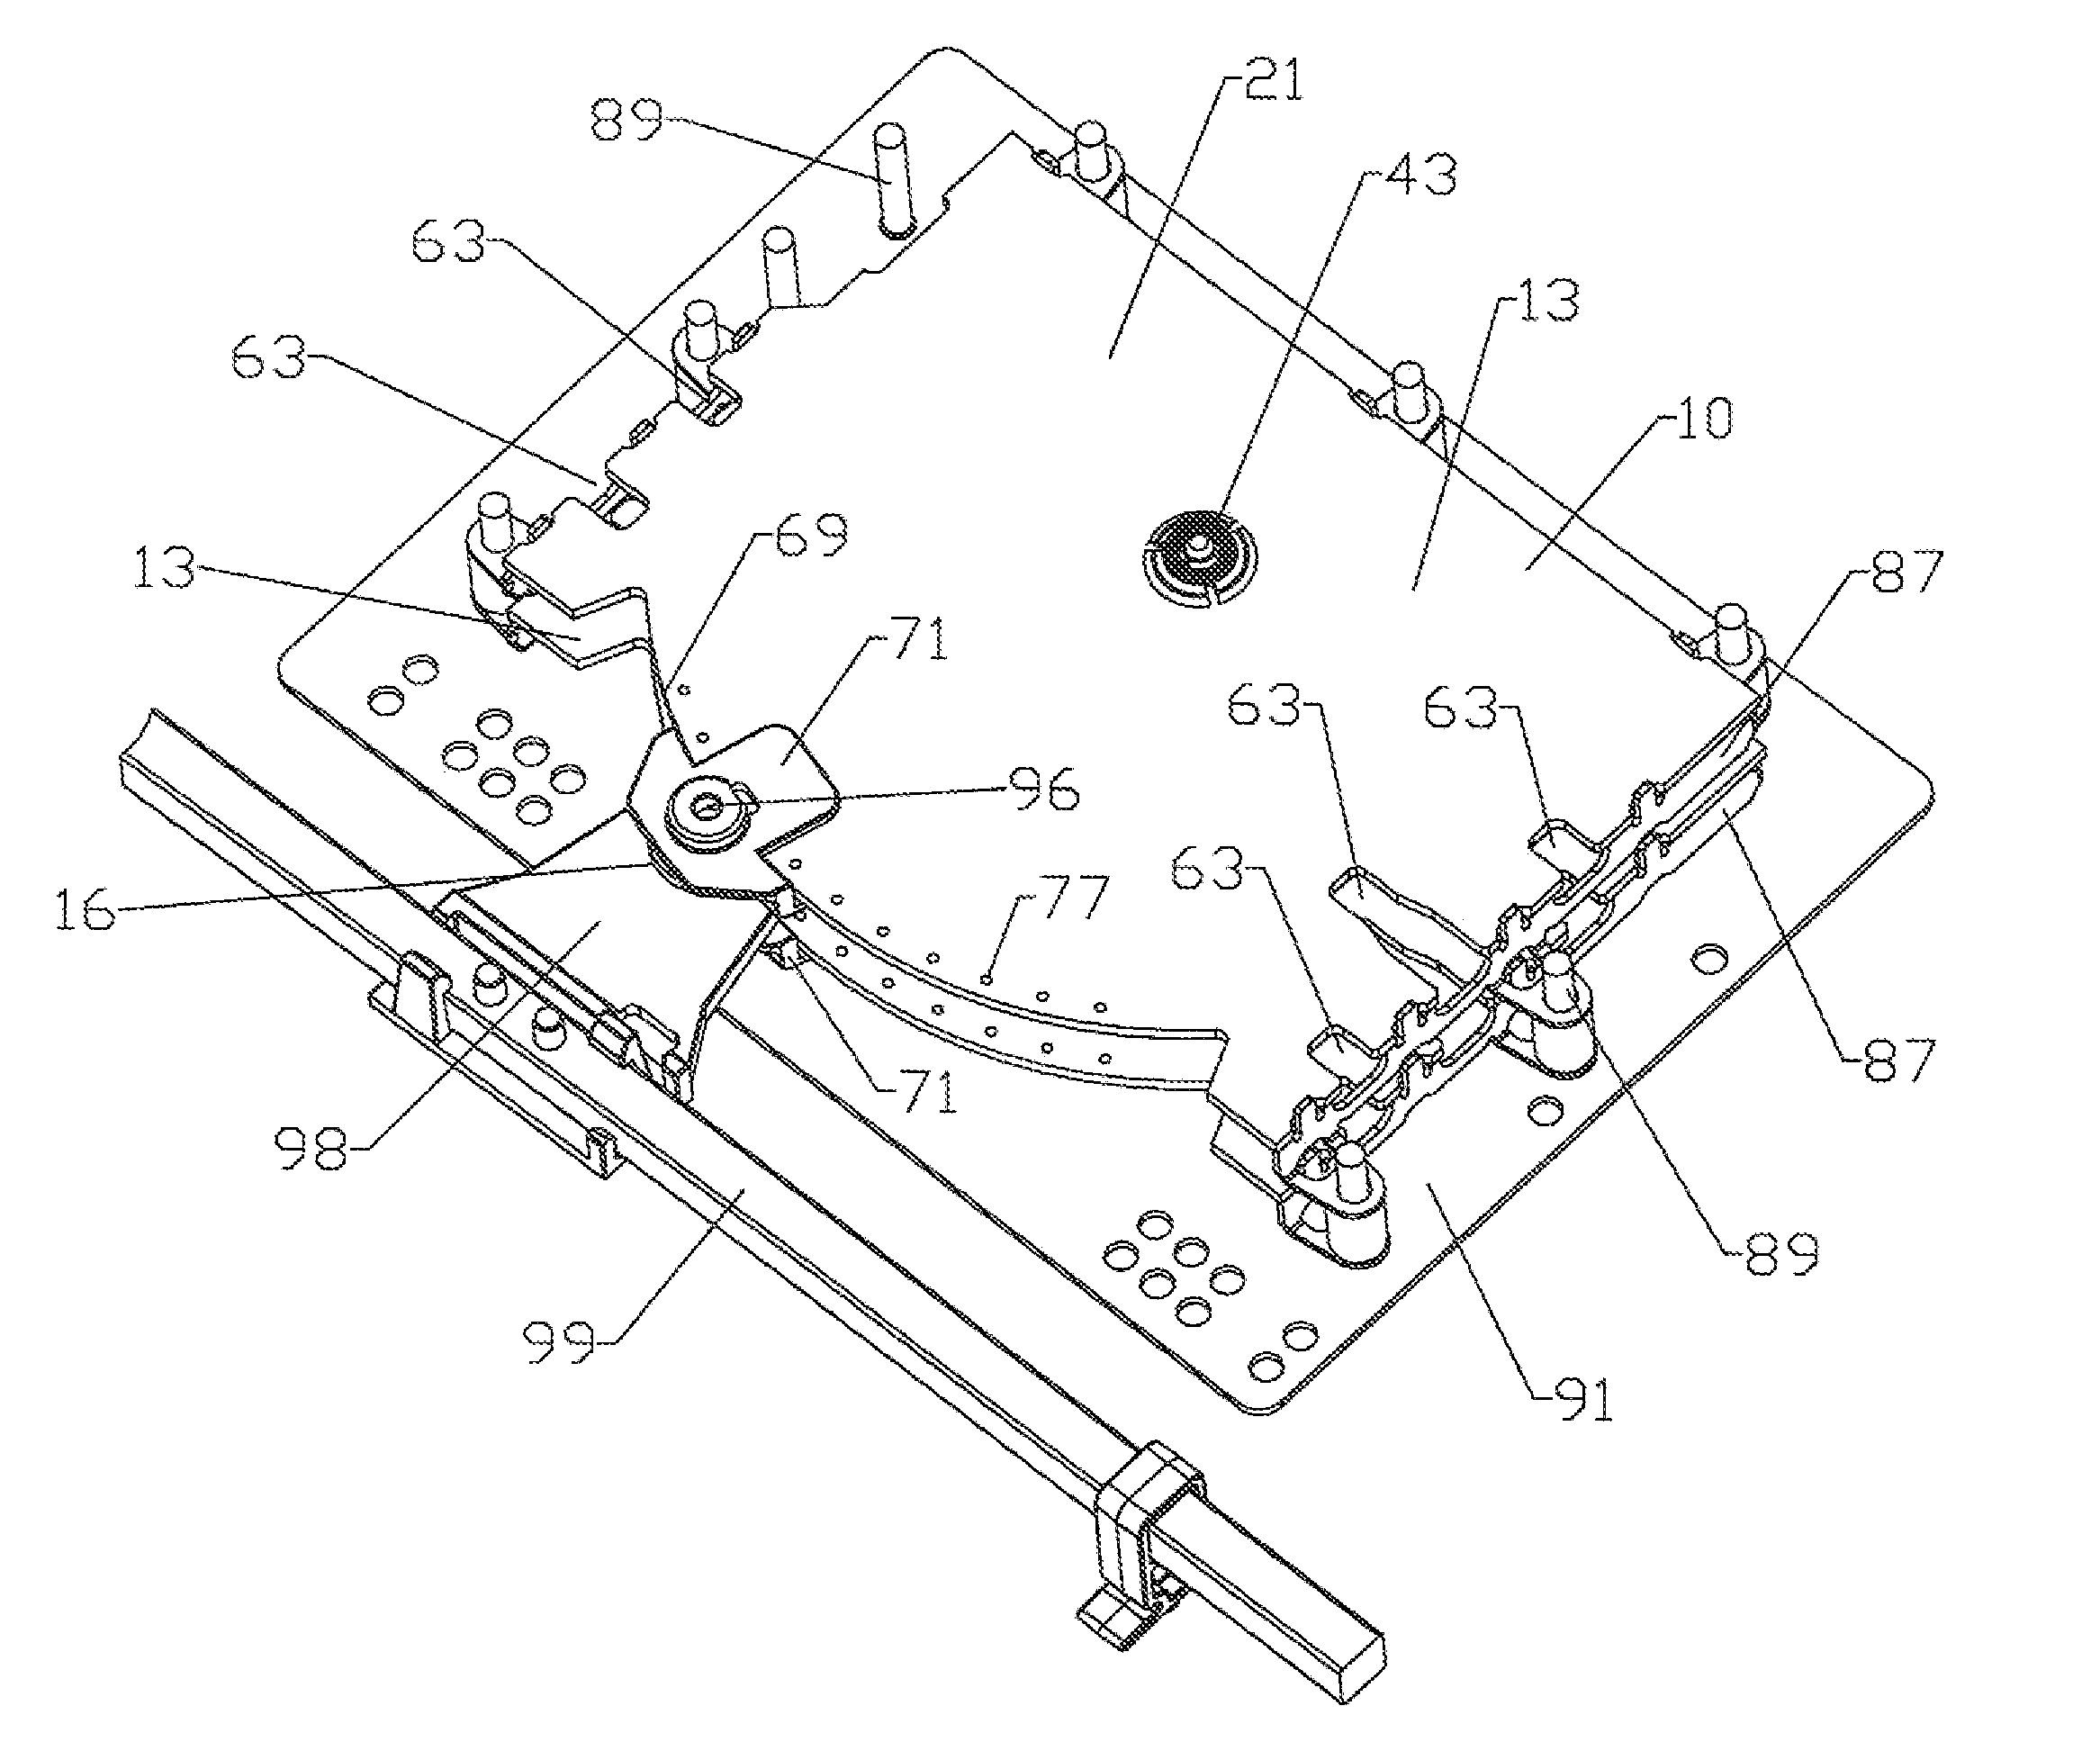 Panel antenna with variable phase shifter